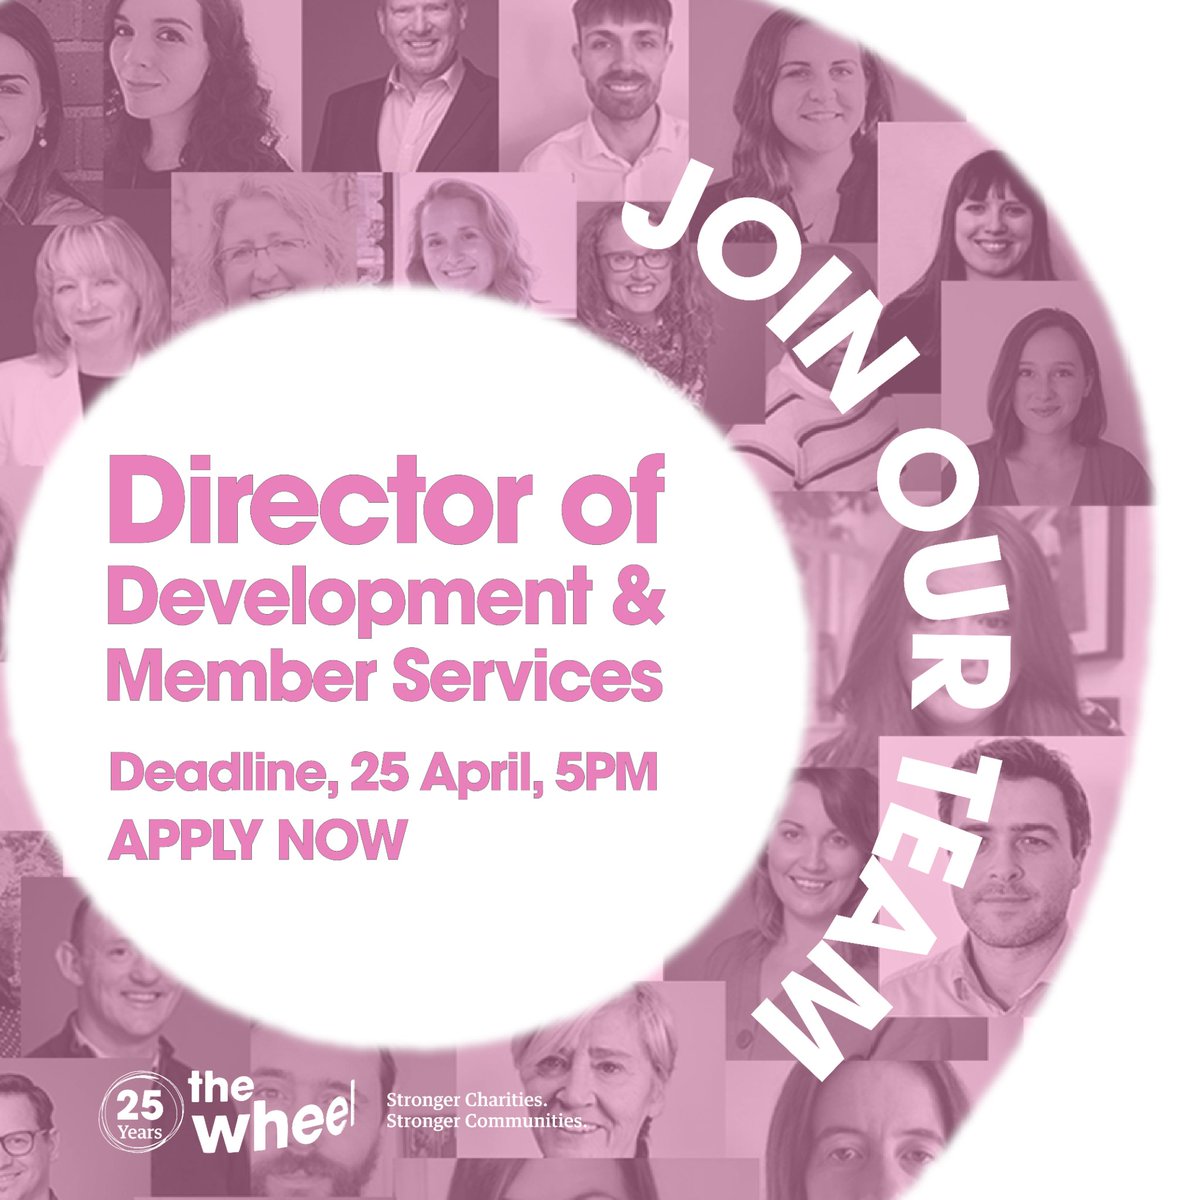 DEADLINE - THIS THURSDAY, 25th April at 5PM! - Thinking about a change? Would you like to become part of a movement of people & organisations working together to shape Ireland’s future? Learn more & apply at wheel.ie/jobs/director-… #dublinjobs #jobsfairy